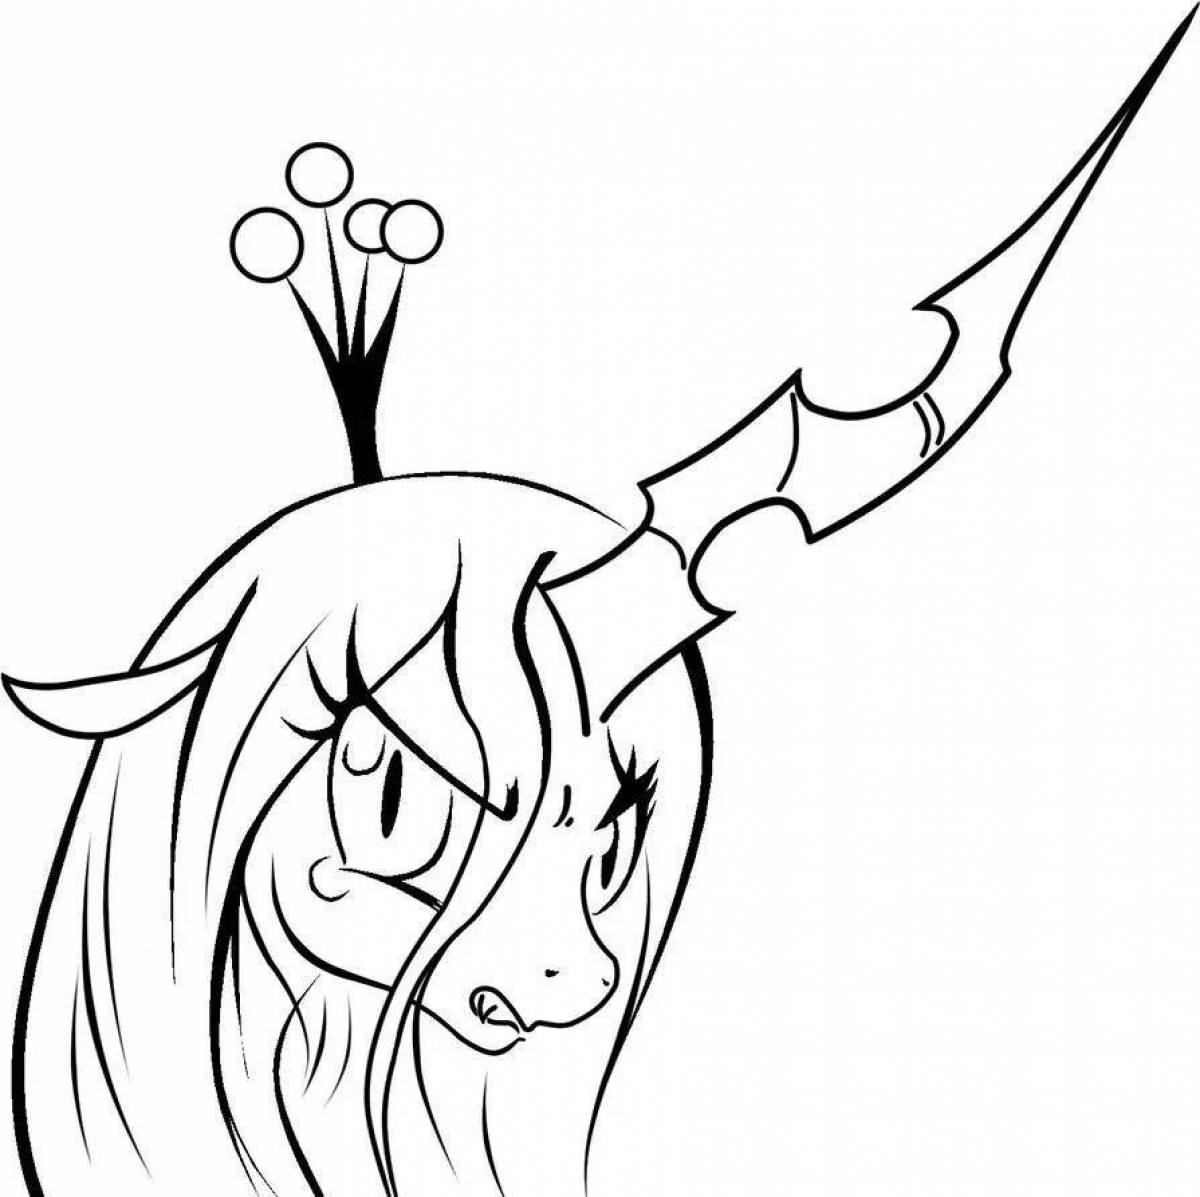 Great pony chrysalis coloring page